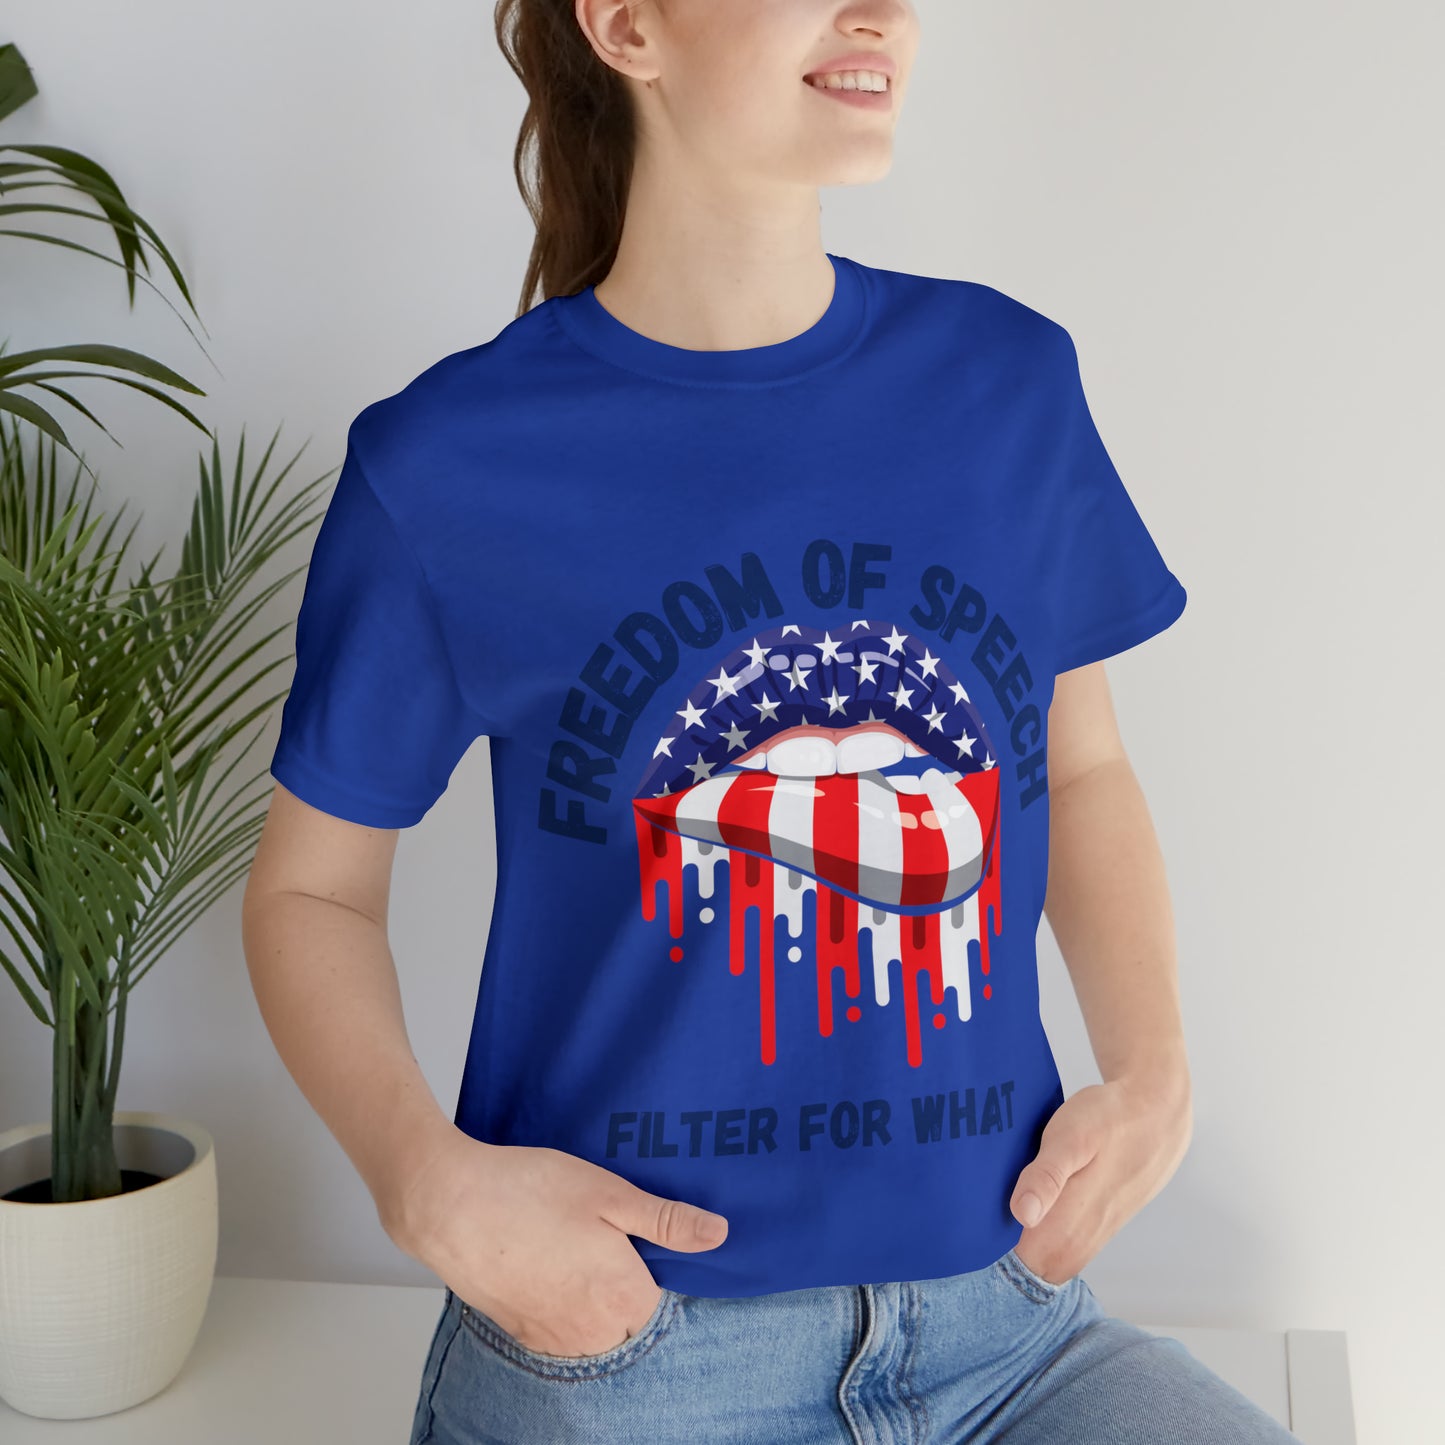 INDEPENDENCE DAY, Freedom of Speech, Jersey Short Sleeve Tee